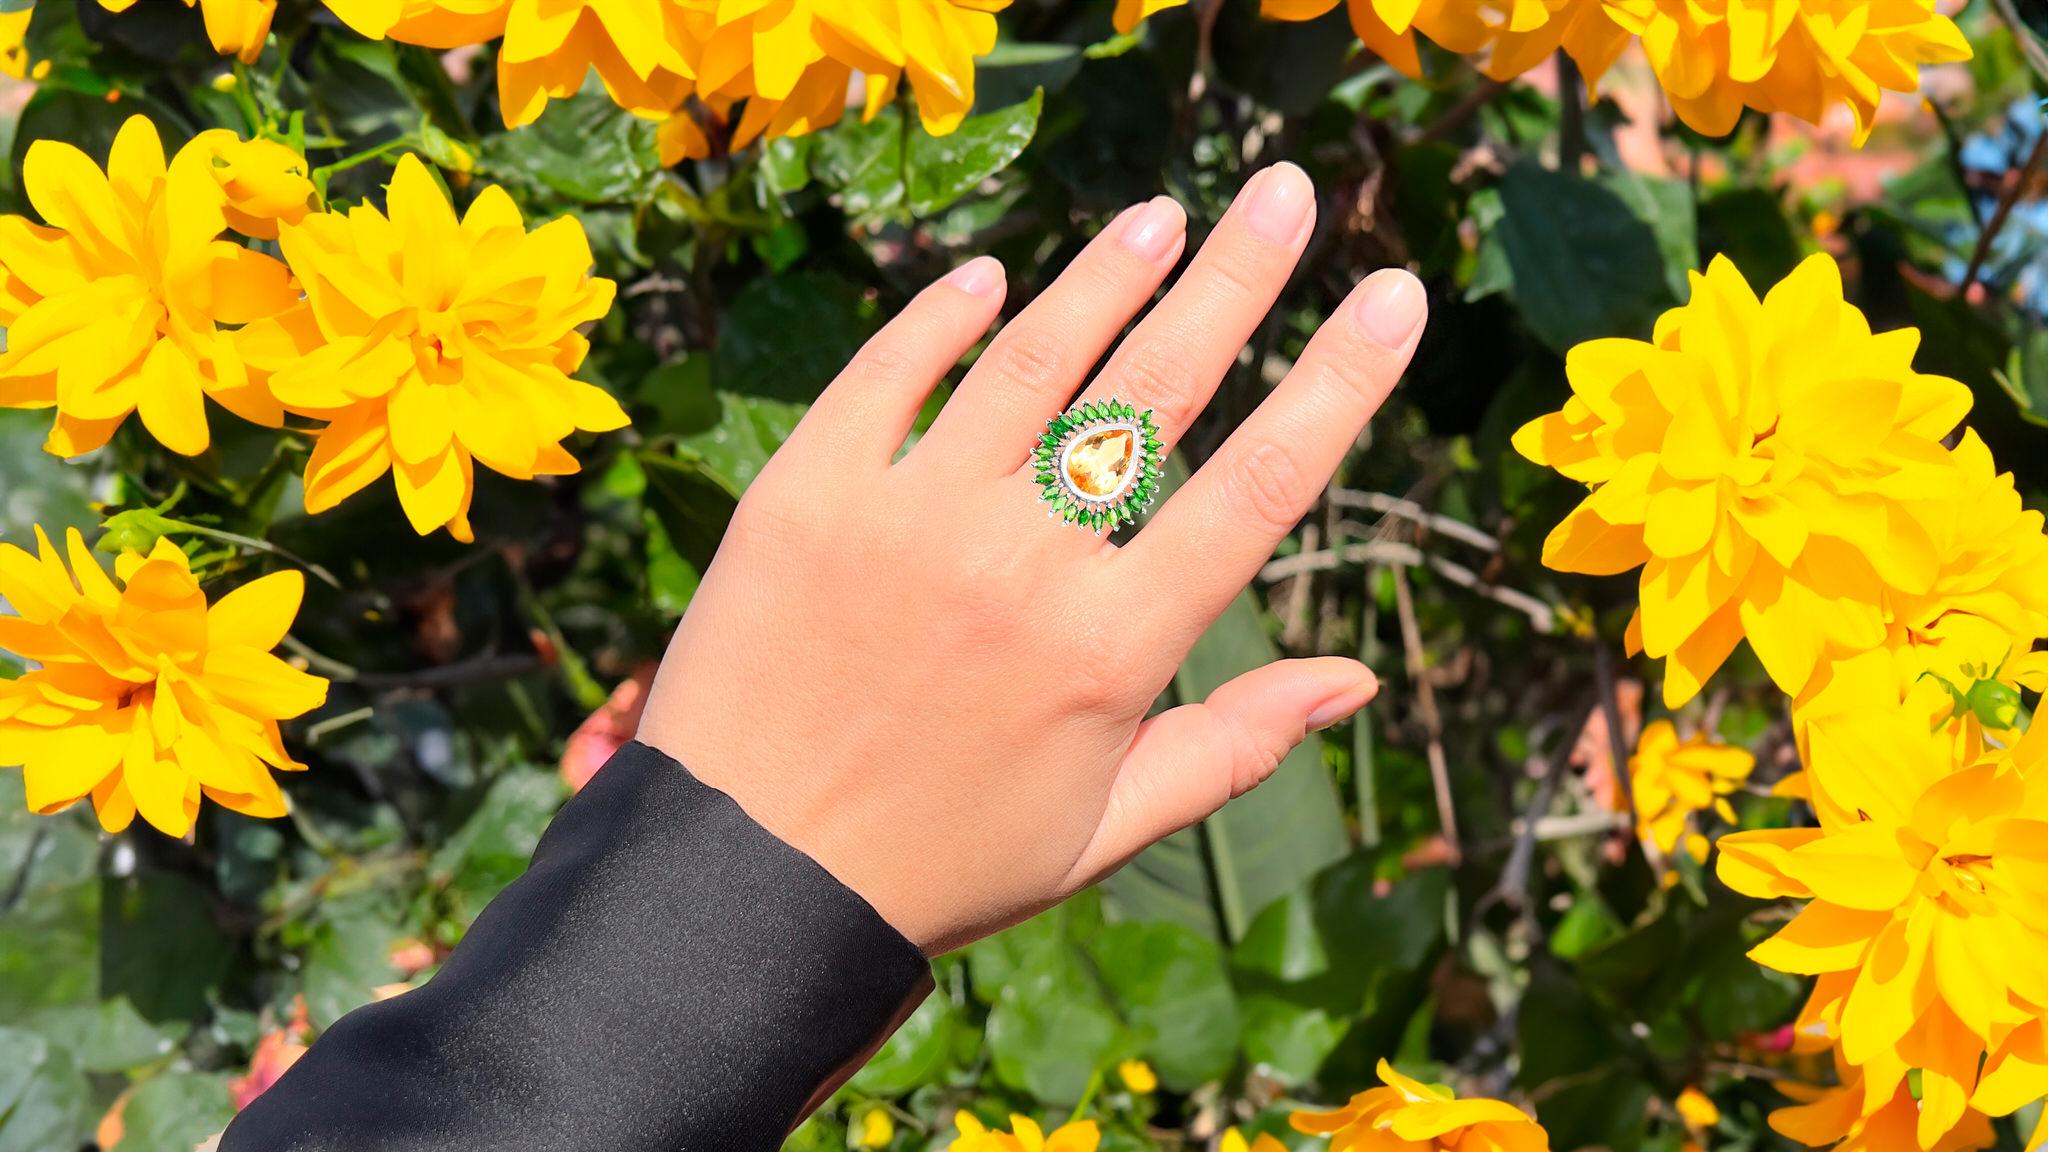 It comes with the Gemological Appraisal by GIA GG/AJP
All Gemstones are Natural
Citrine = 5.20 Carats
26 Chrome Diopsides = 1.85 Carats
Metal: Rhodium Plated Sterling Silver
Ring Size: 6* US
*It can be resized complimentary